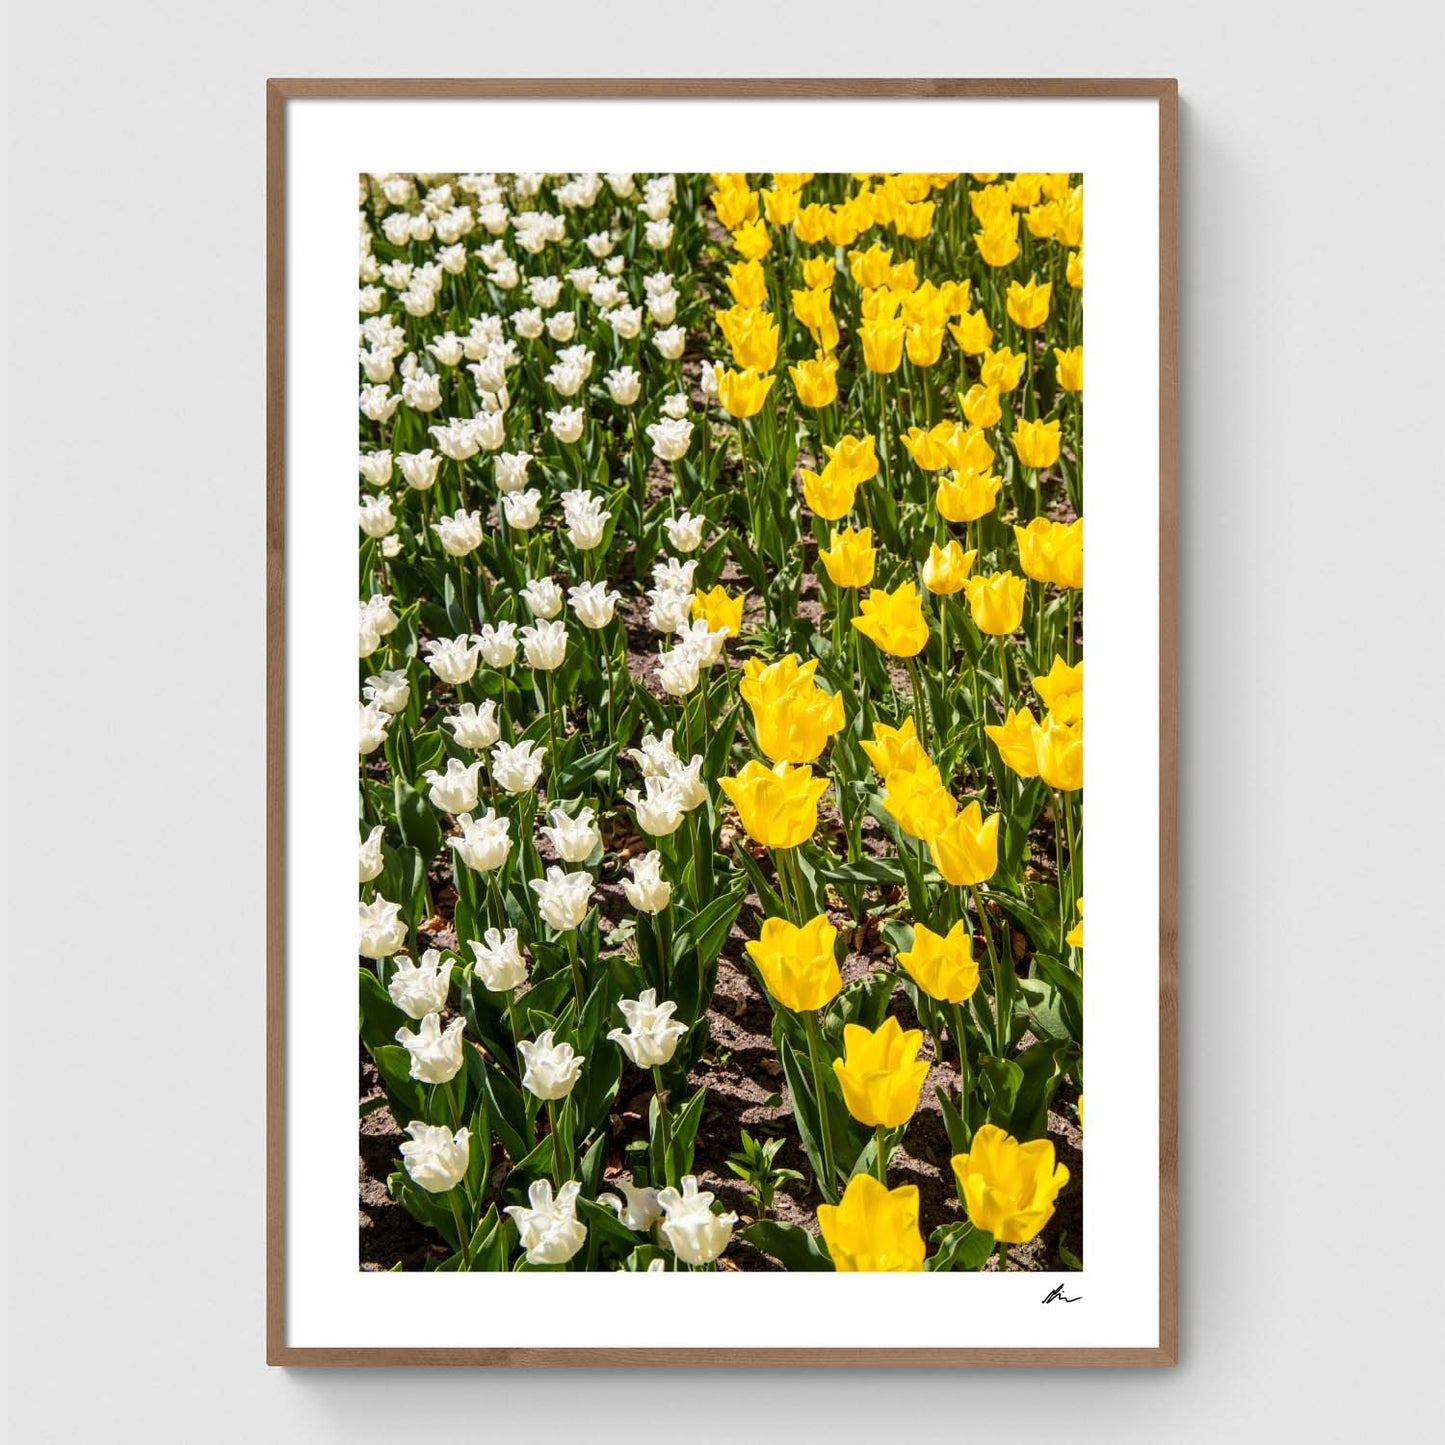 White and yellow tulips in field